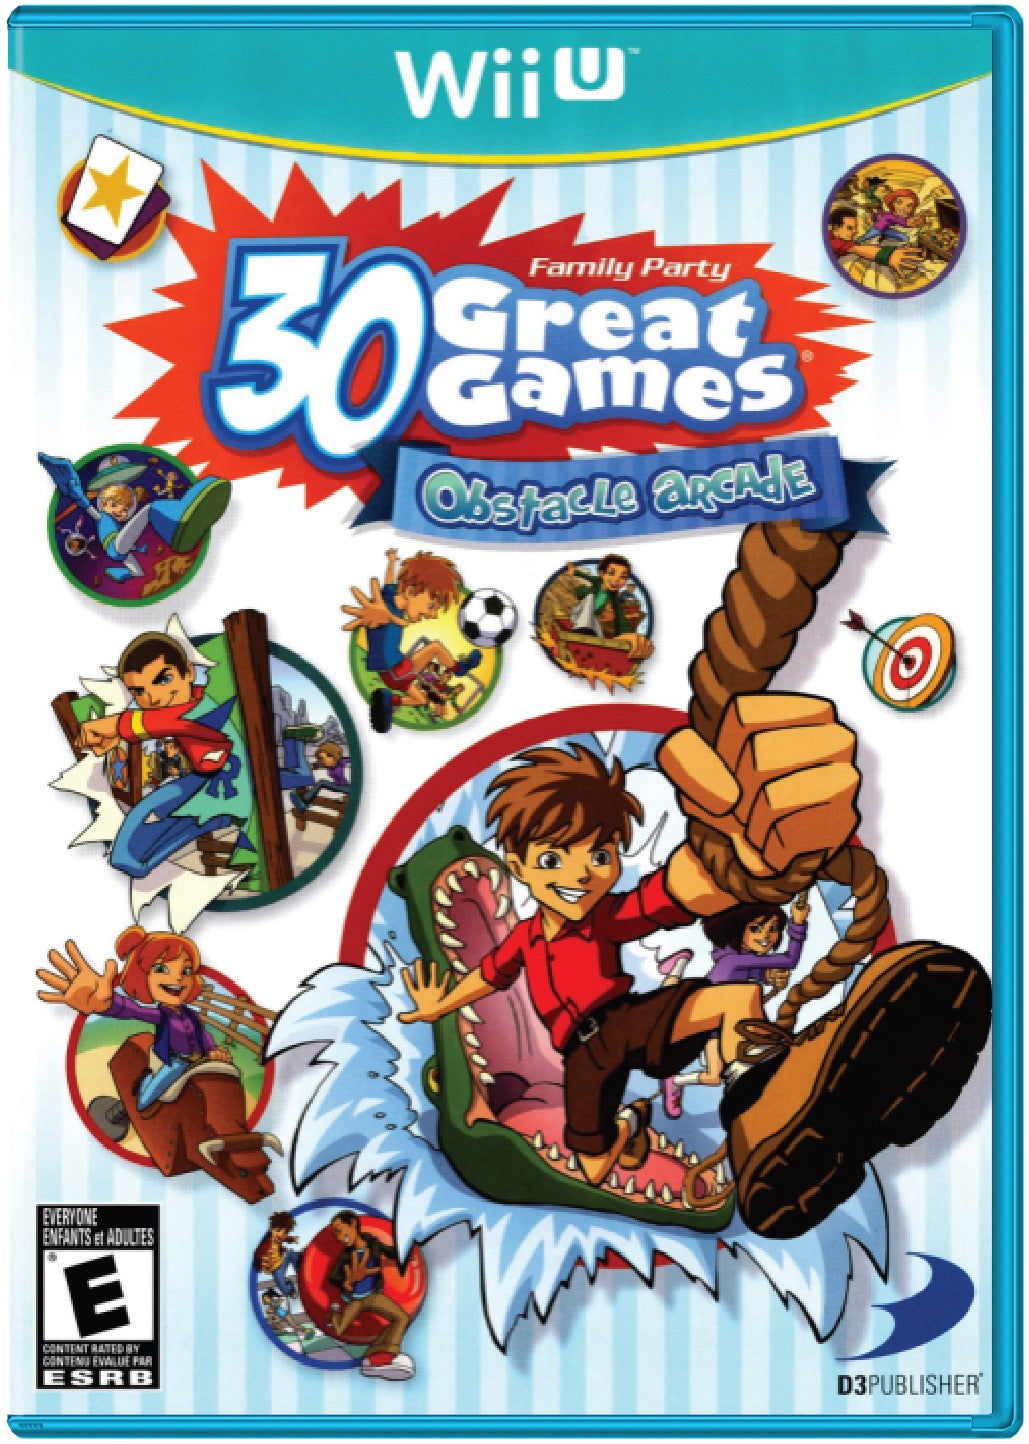 Family Party 30 Great Games Obstacle Arcade Cover Art and Product Photo